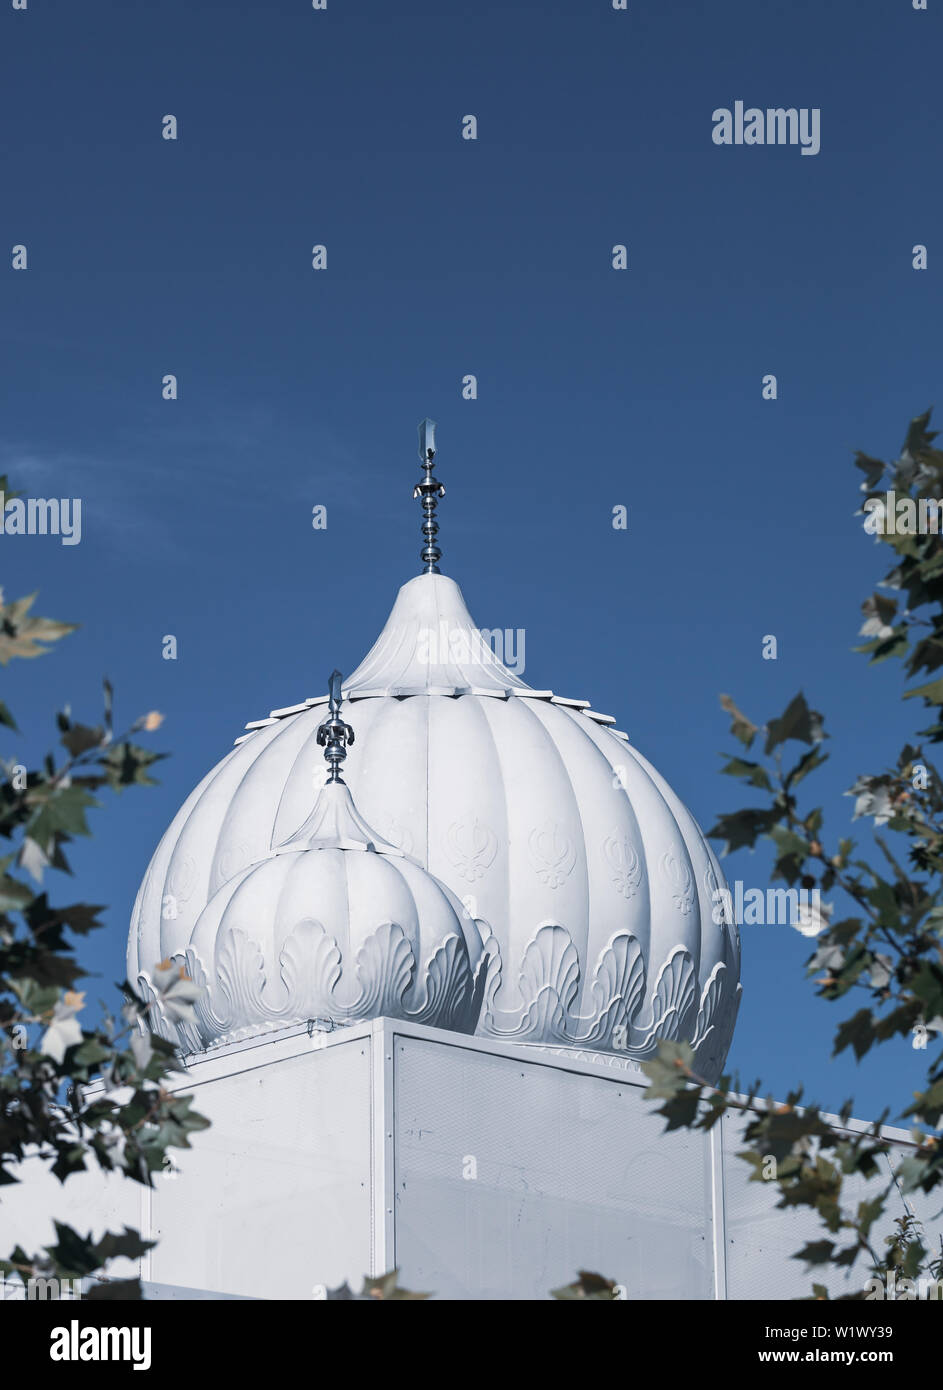 White cupolas of a Sikh Temple or Gurdwara with blue sky in the background Stock Photo